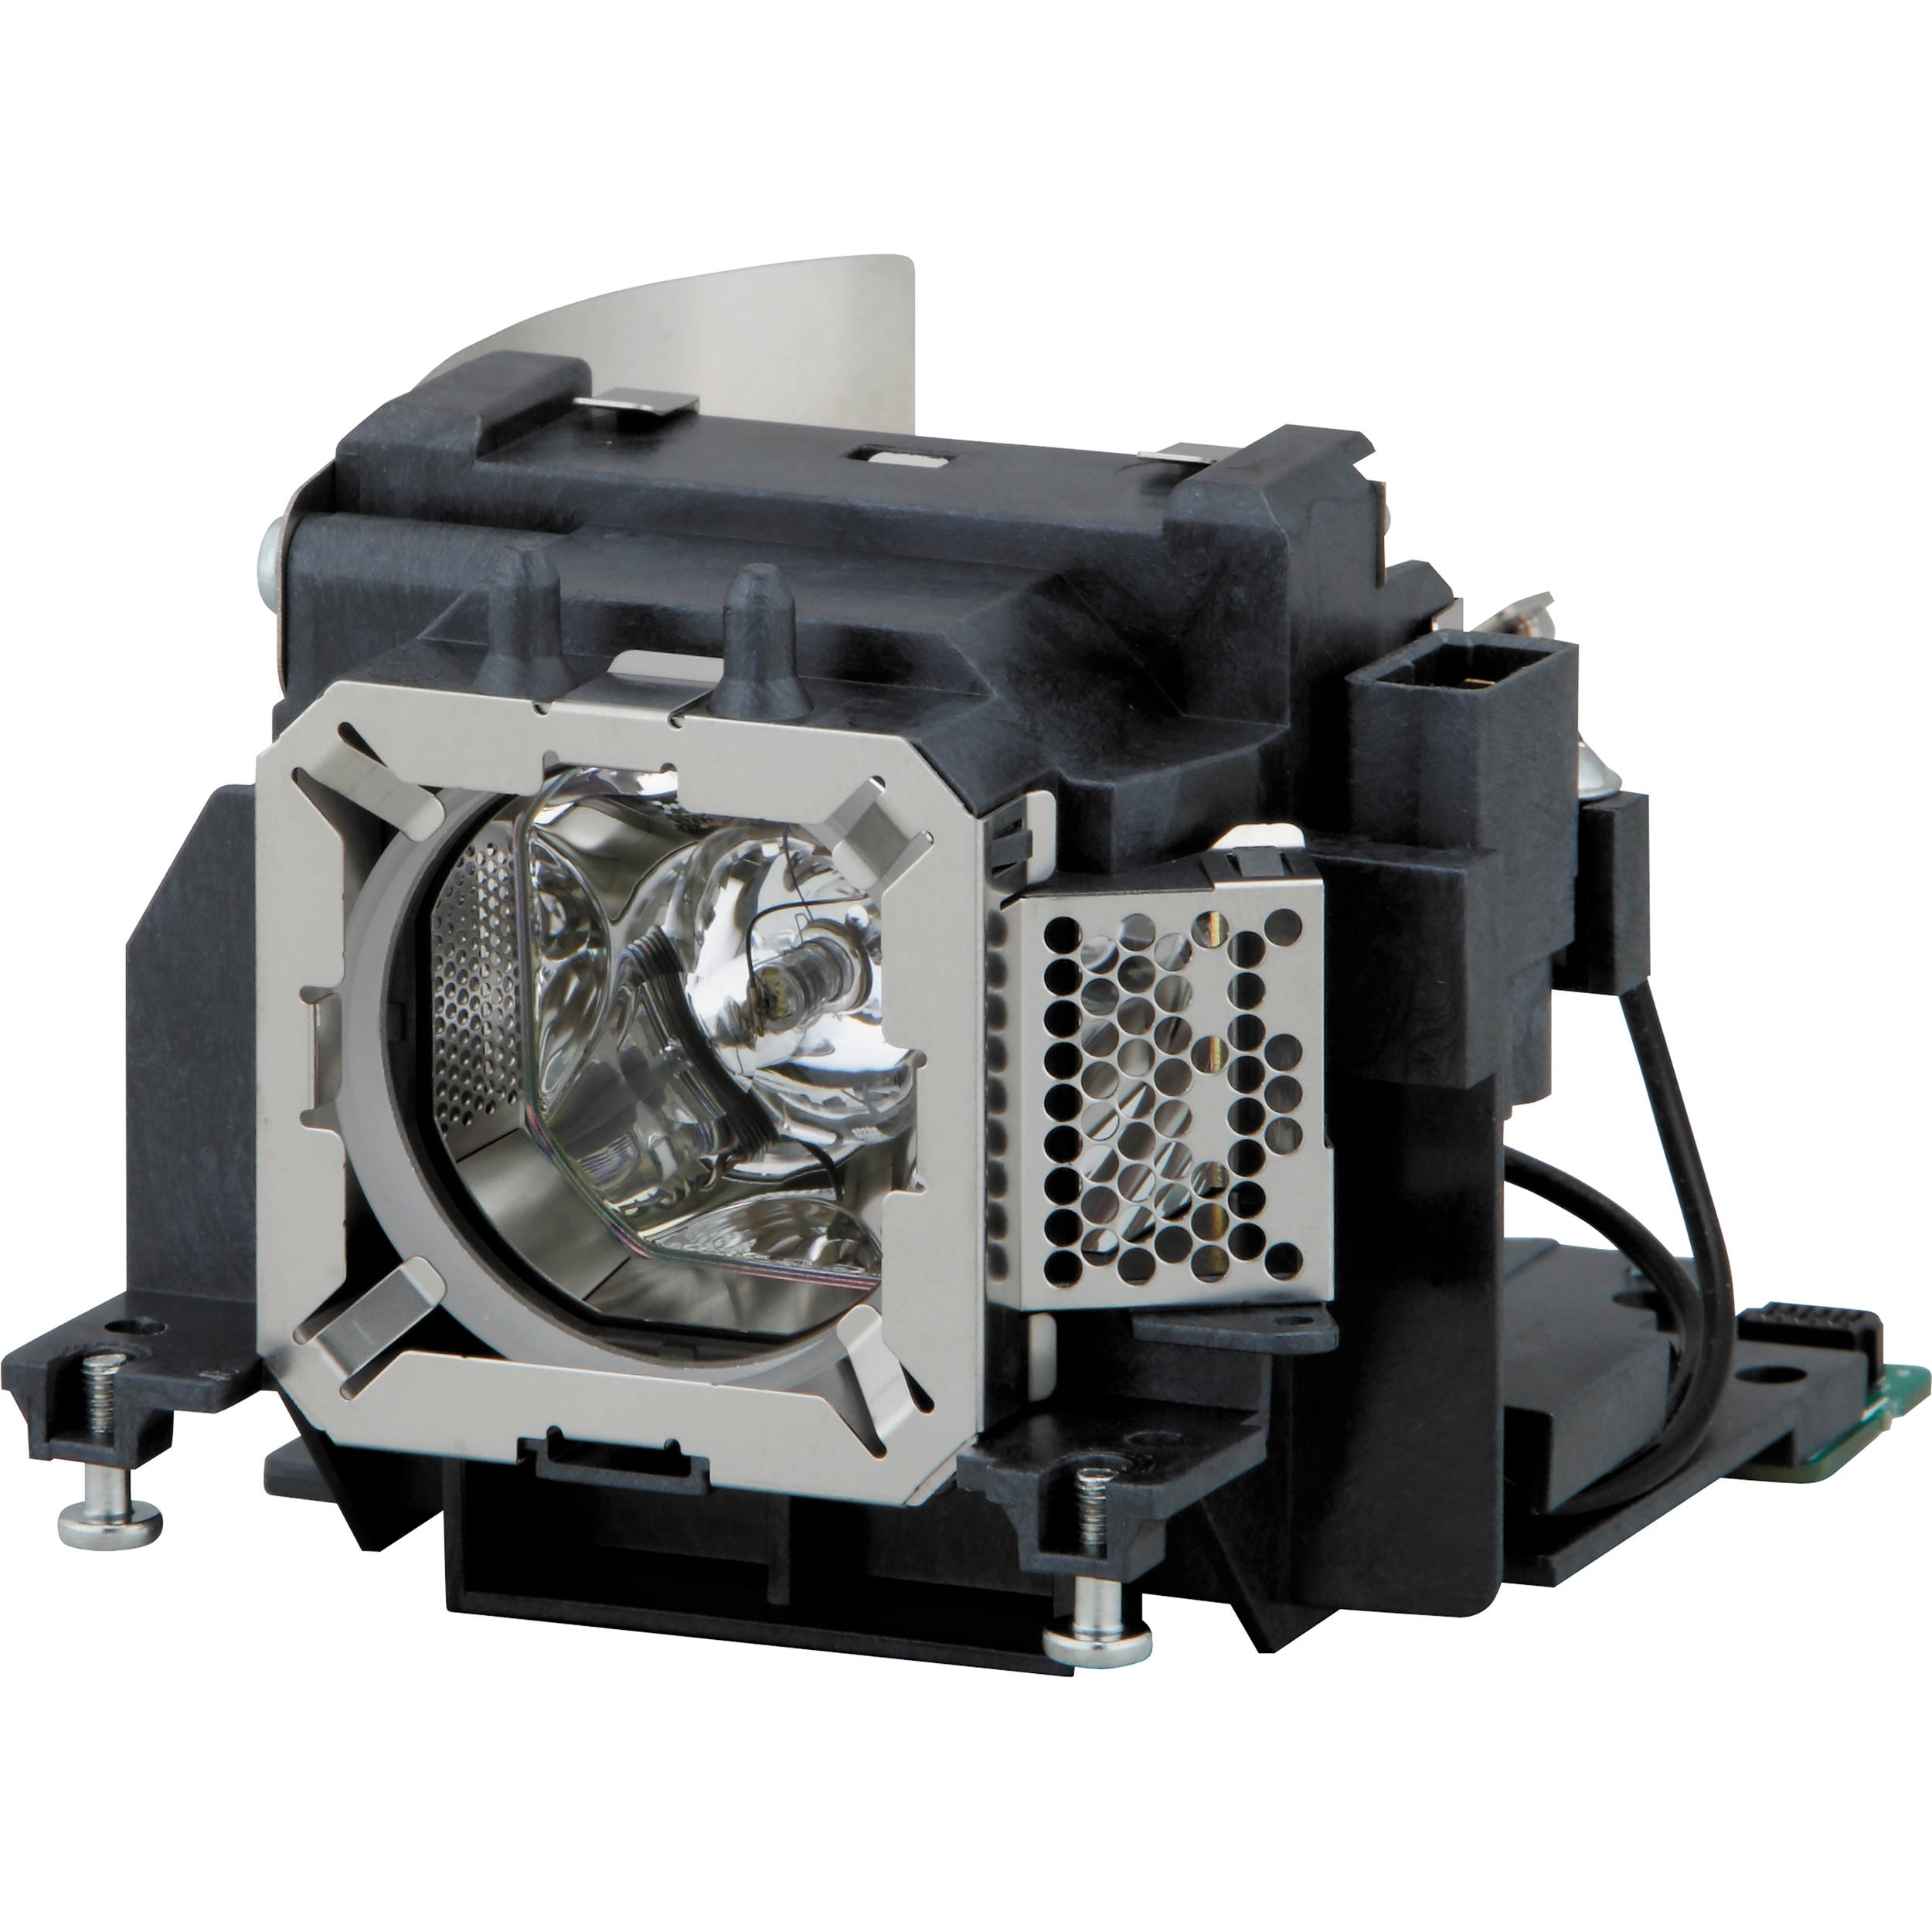 Buyquest ET-LAV300  Genuine Compatible Replacement Projector Lamp for Panasonic. Includes New UHM 230W Bulb and Housing